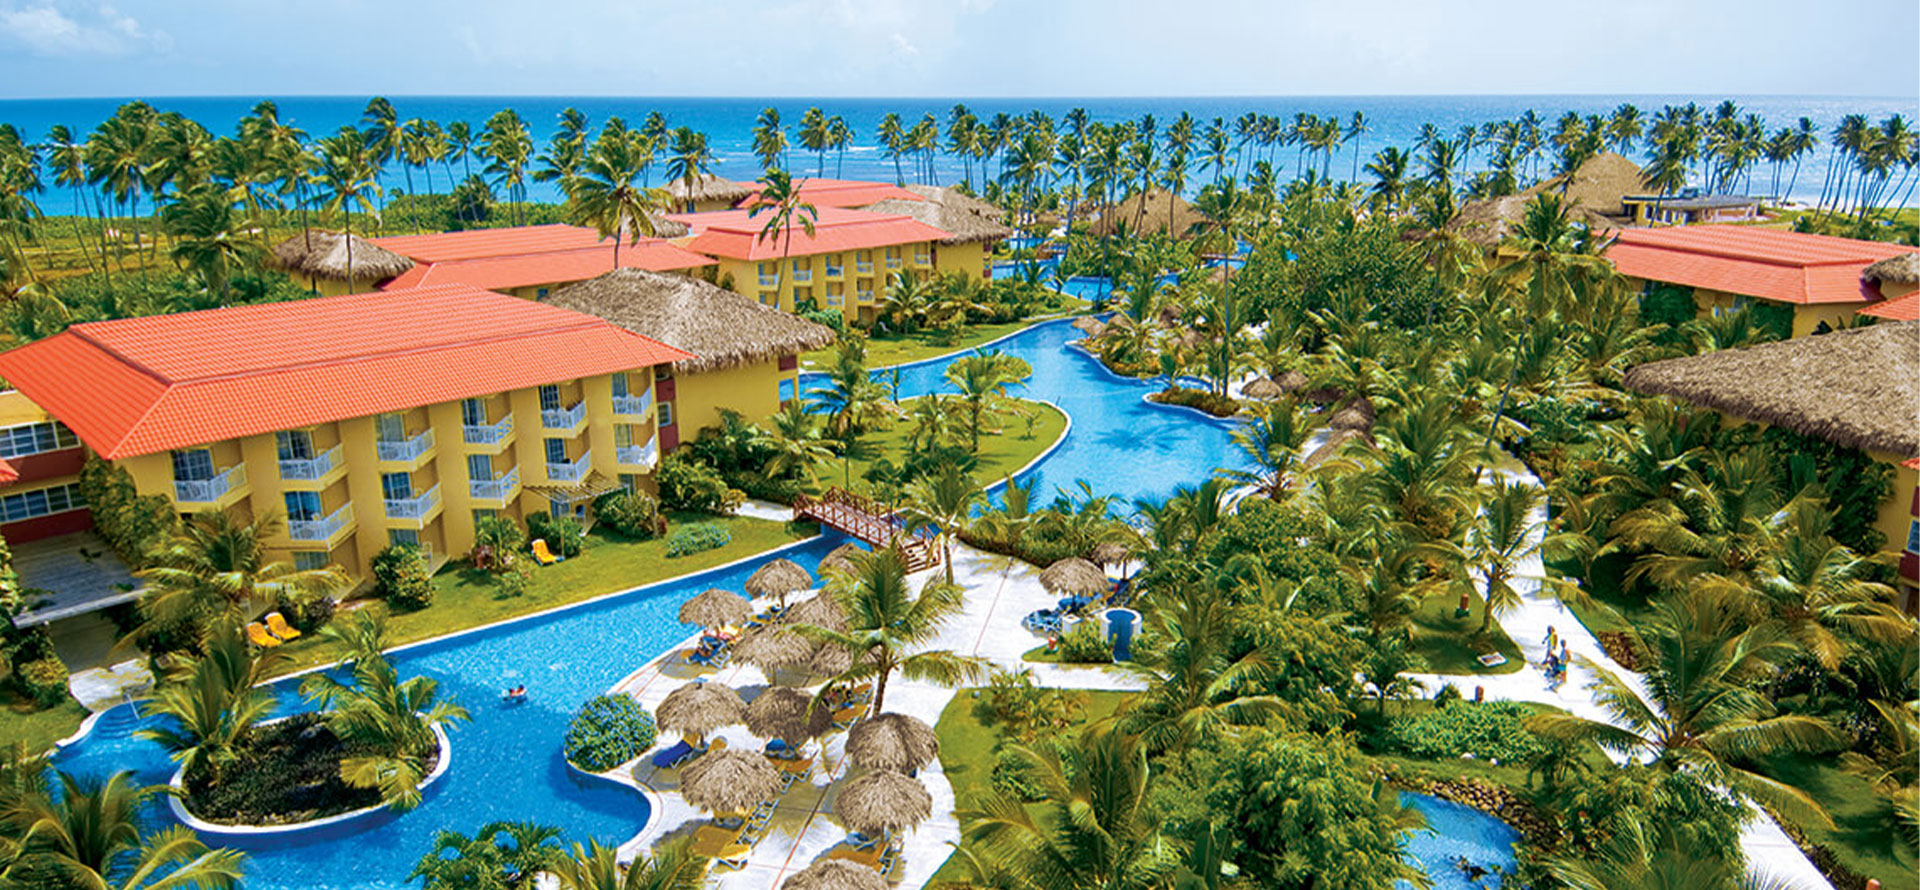 Beautiful scenery from the rooms of the family resort of punta cana.